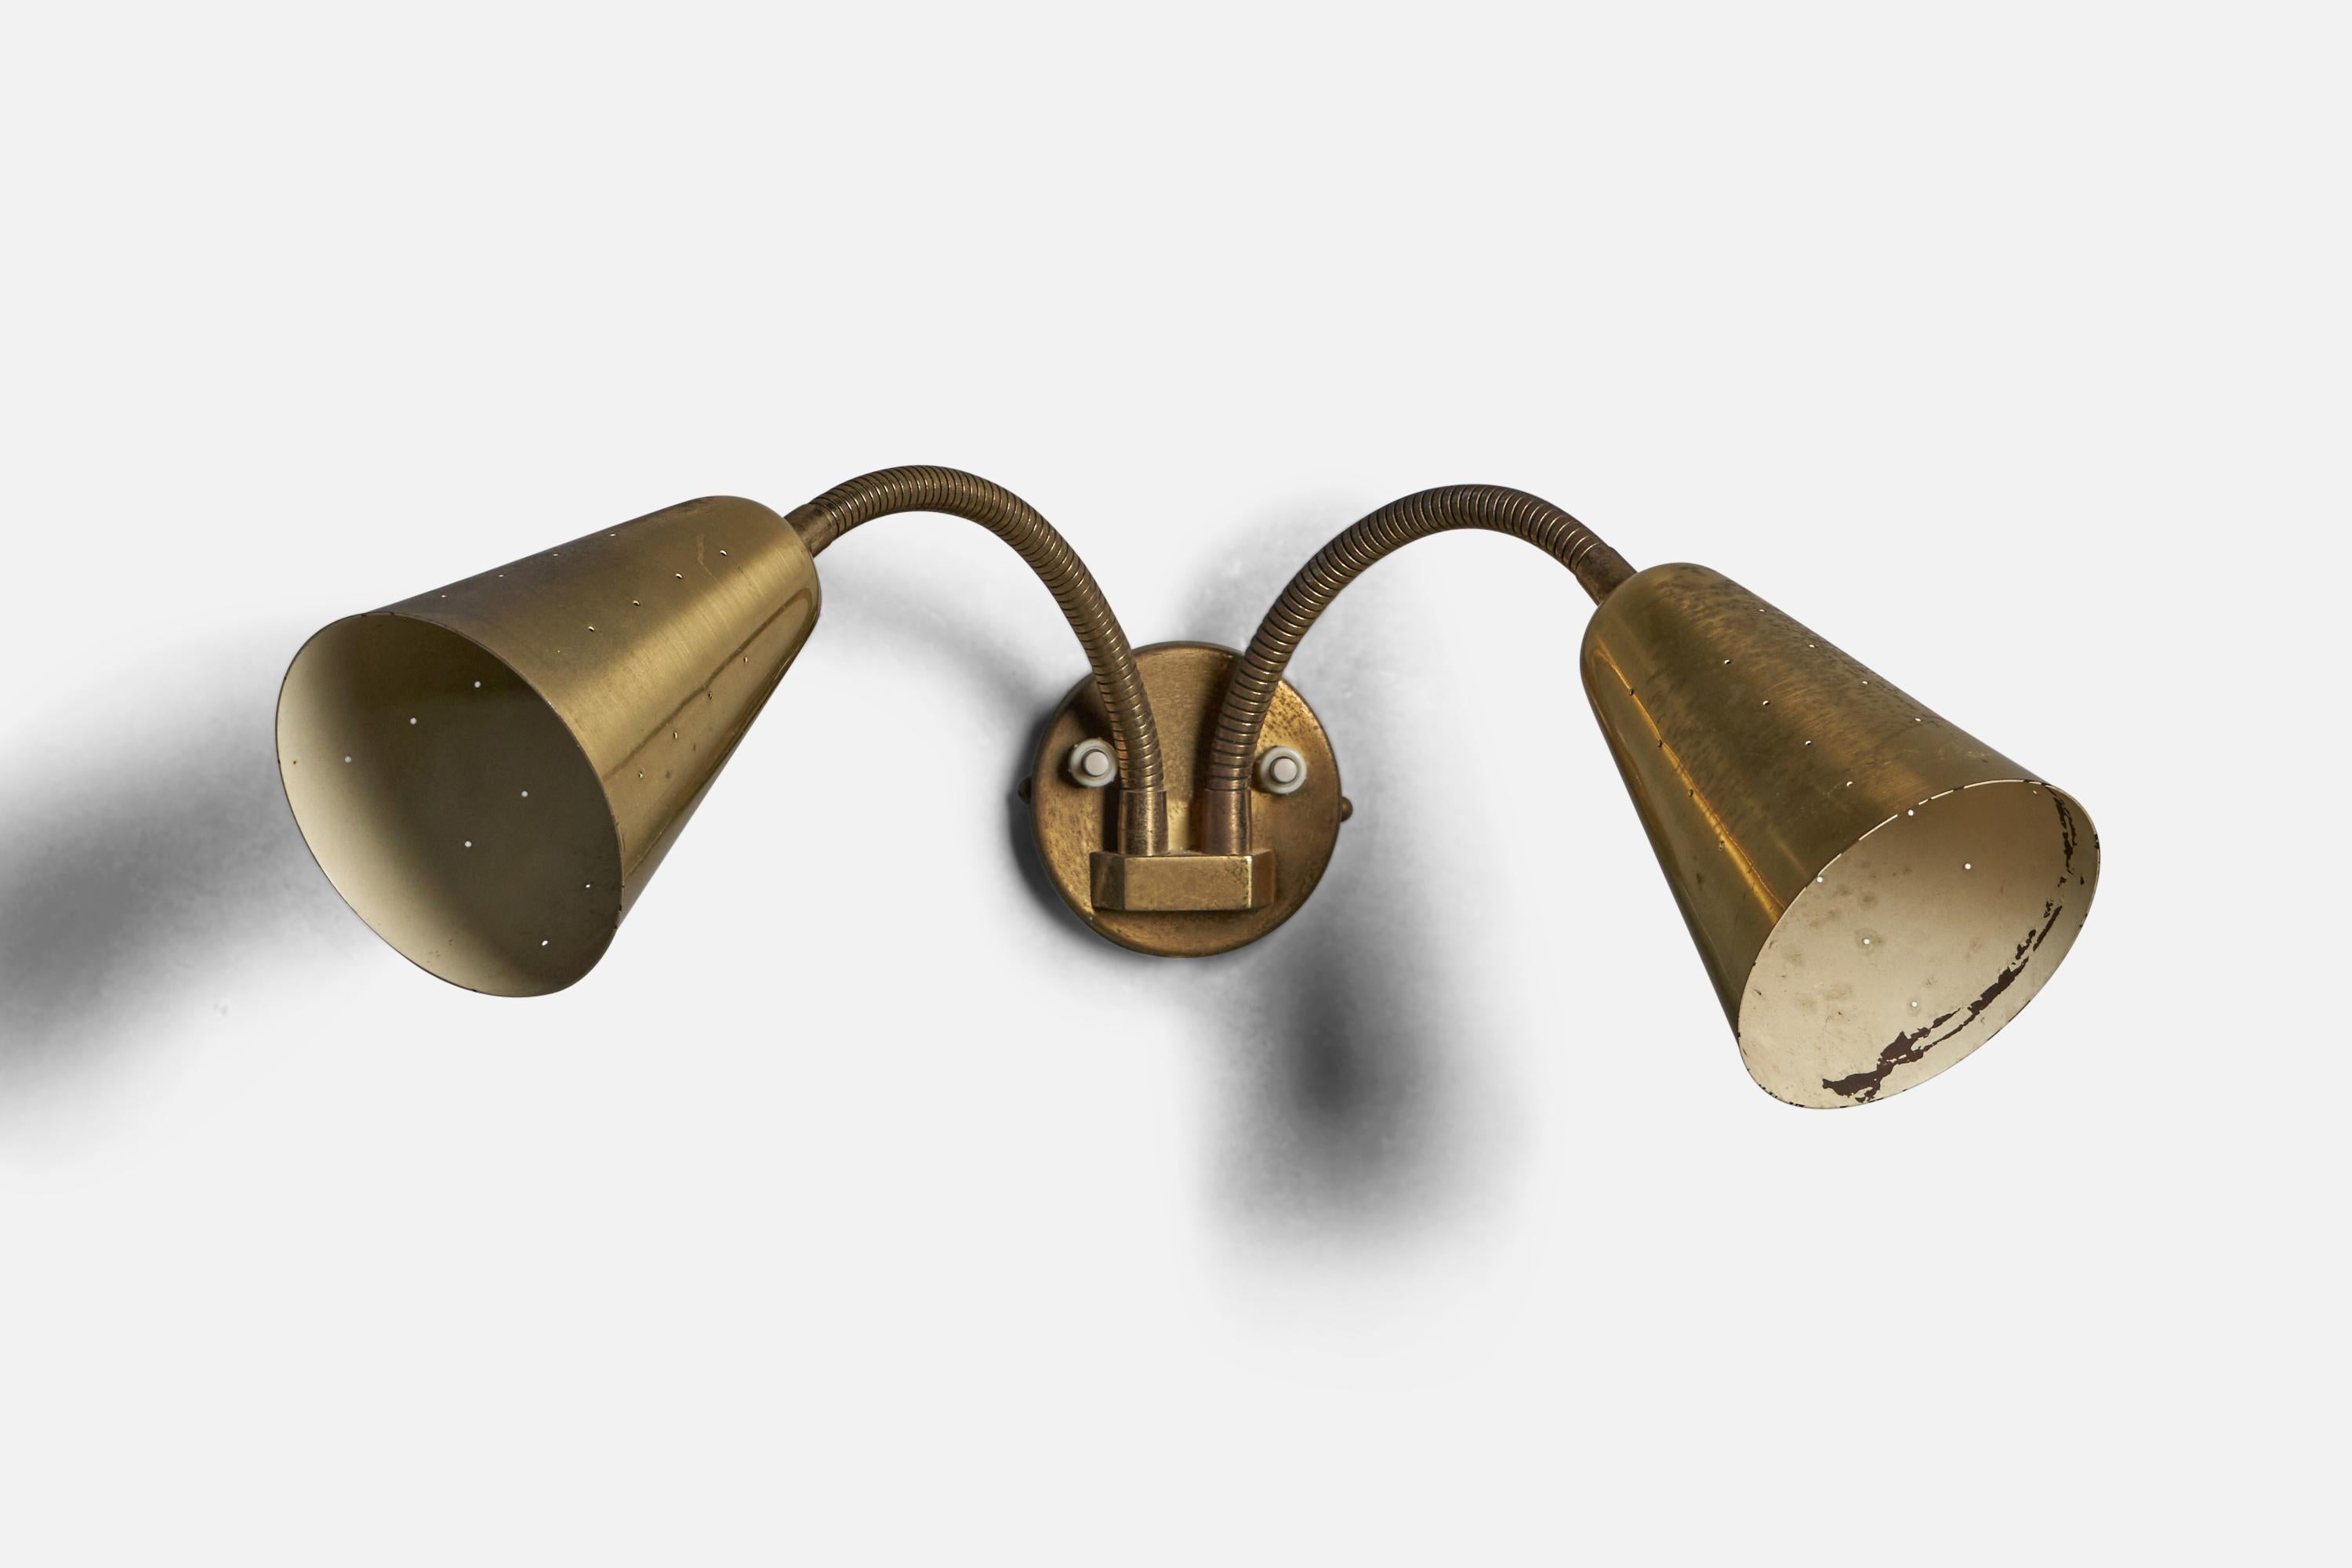 An adjustable two-armed brass wall light, designed and produced in Denmark, 1940s.

Overall Dimensions (inches): 9” H x 19.5” W x 9.5” D
Back Plate Dimensions (inches): 3.25” Diameter x 0.5” D
Bulb Specifications: E-14 Bulb
Number of Sockets: 2